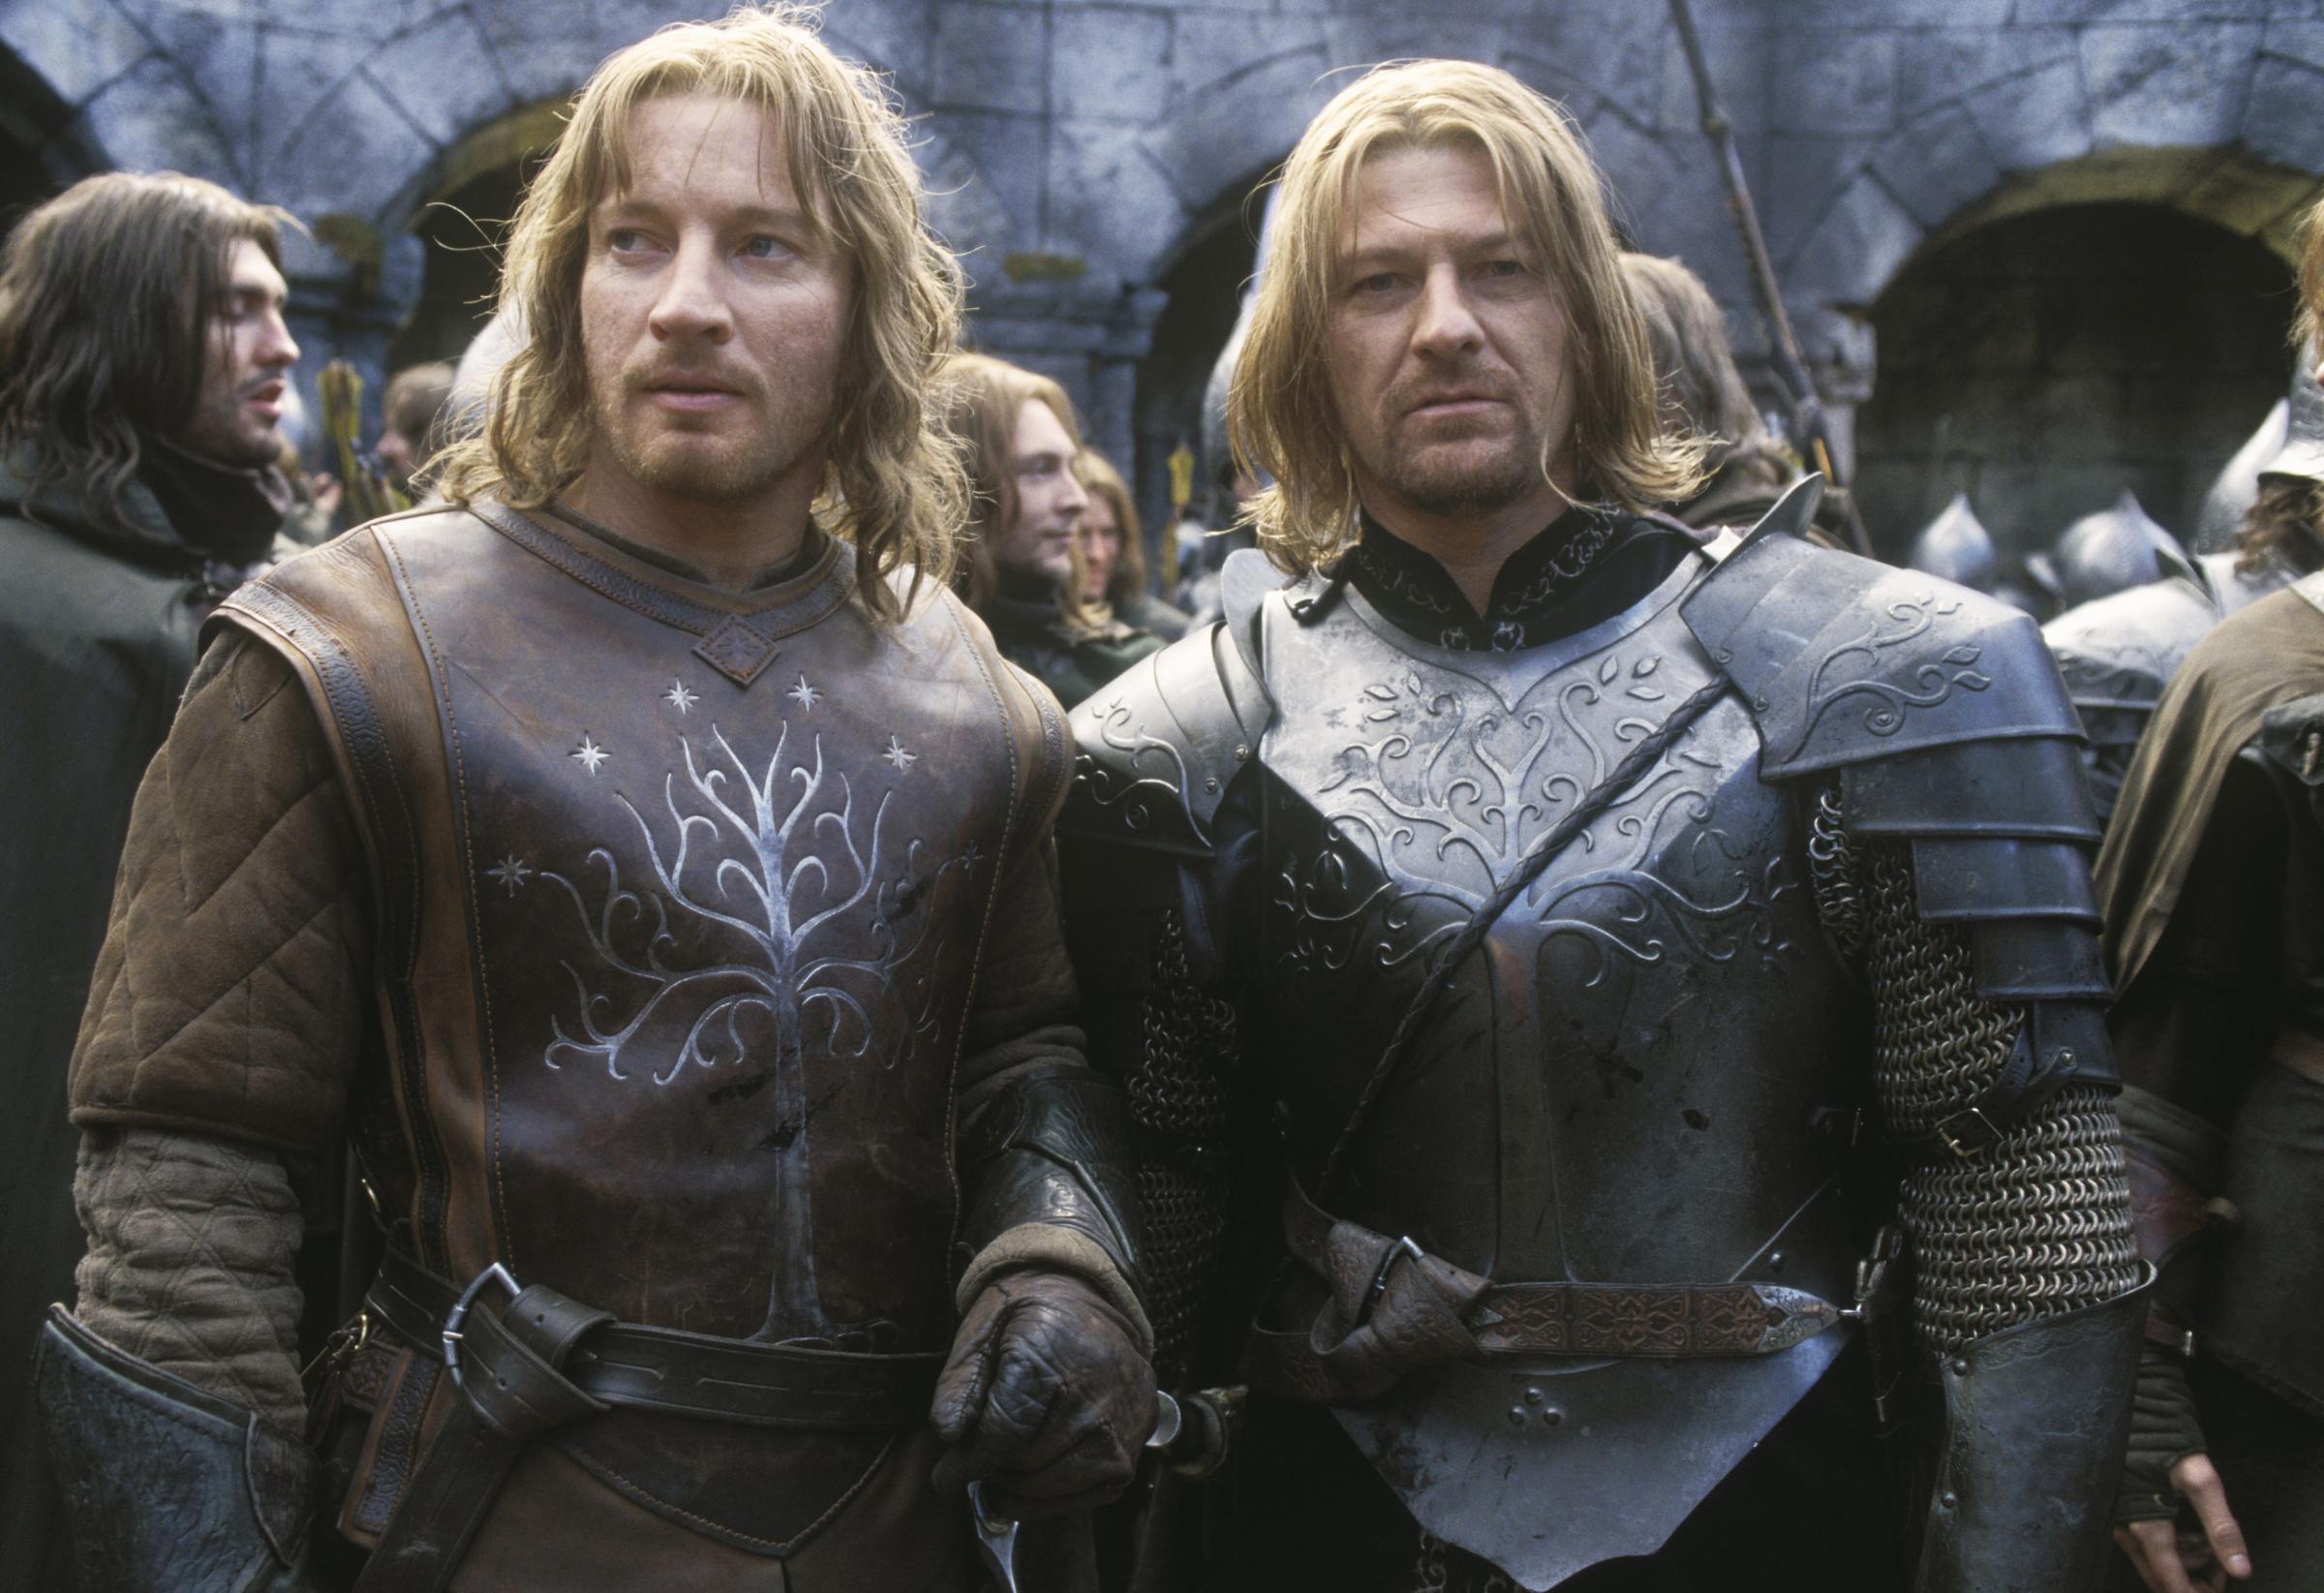 Sean Bean and David Wenham filming The Lord of the Rings: The Two Towers.